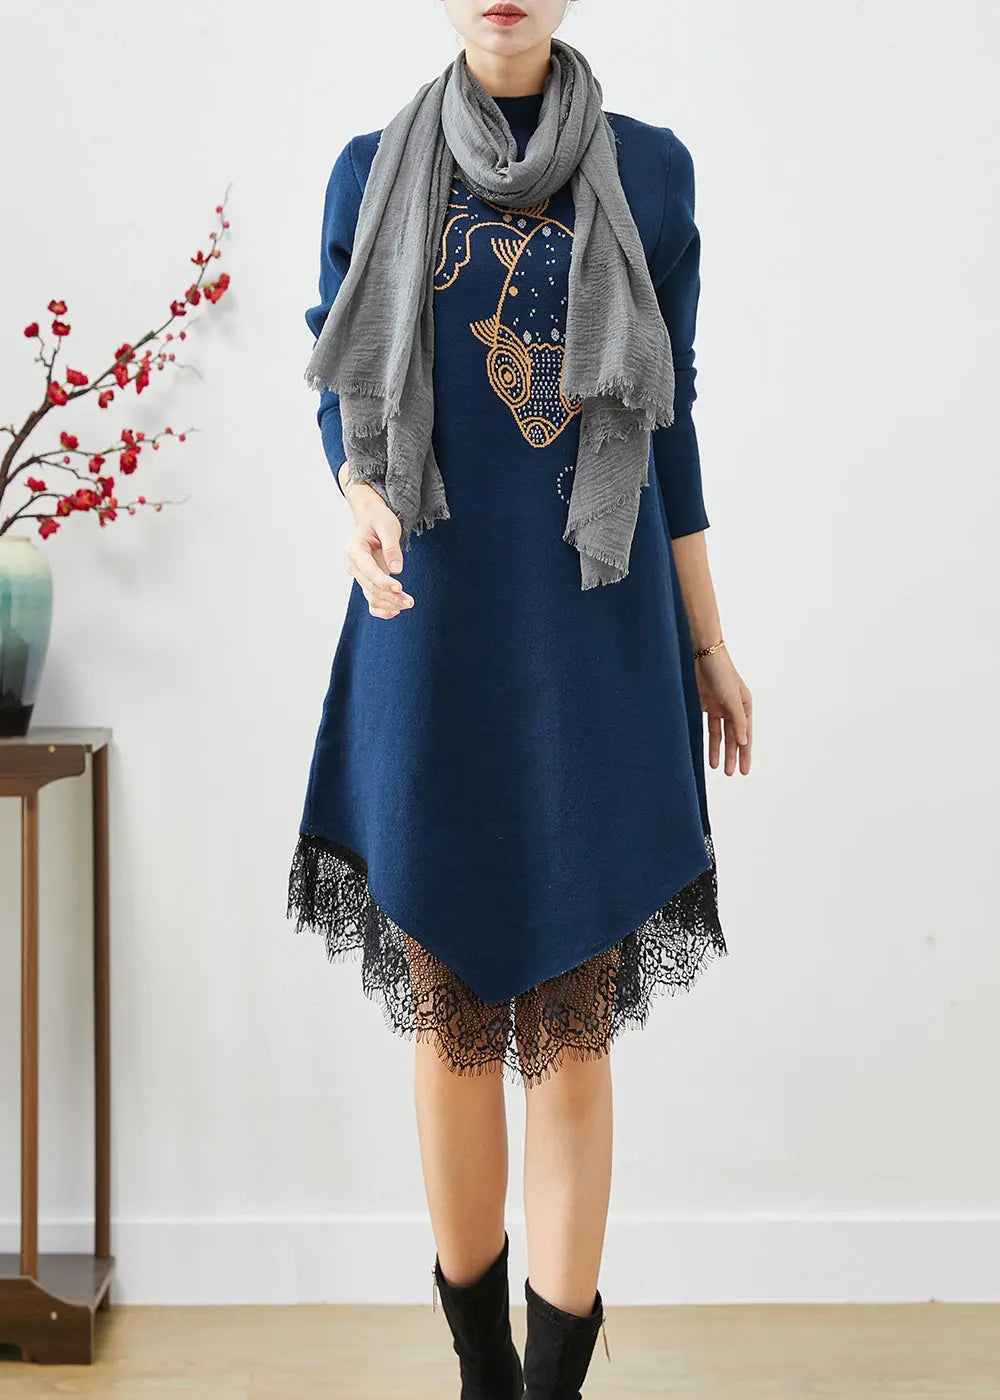 Navy Patchwork Lace Knitted Dress Asymmetrical Print Fall Ada Fashion